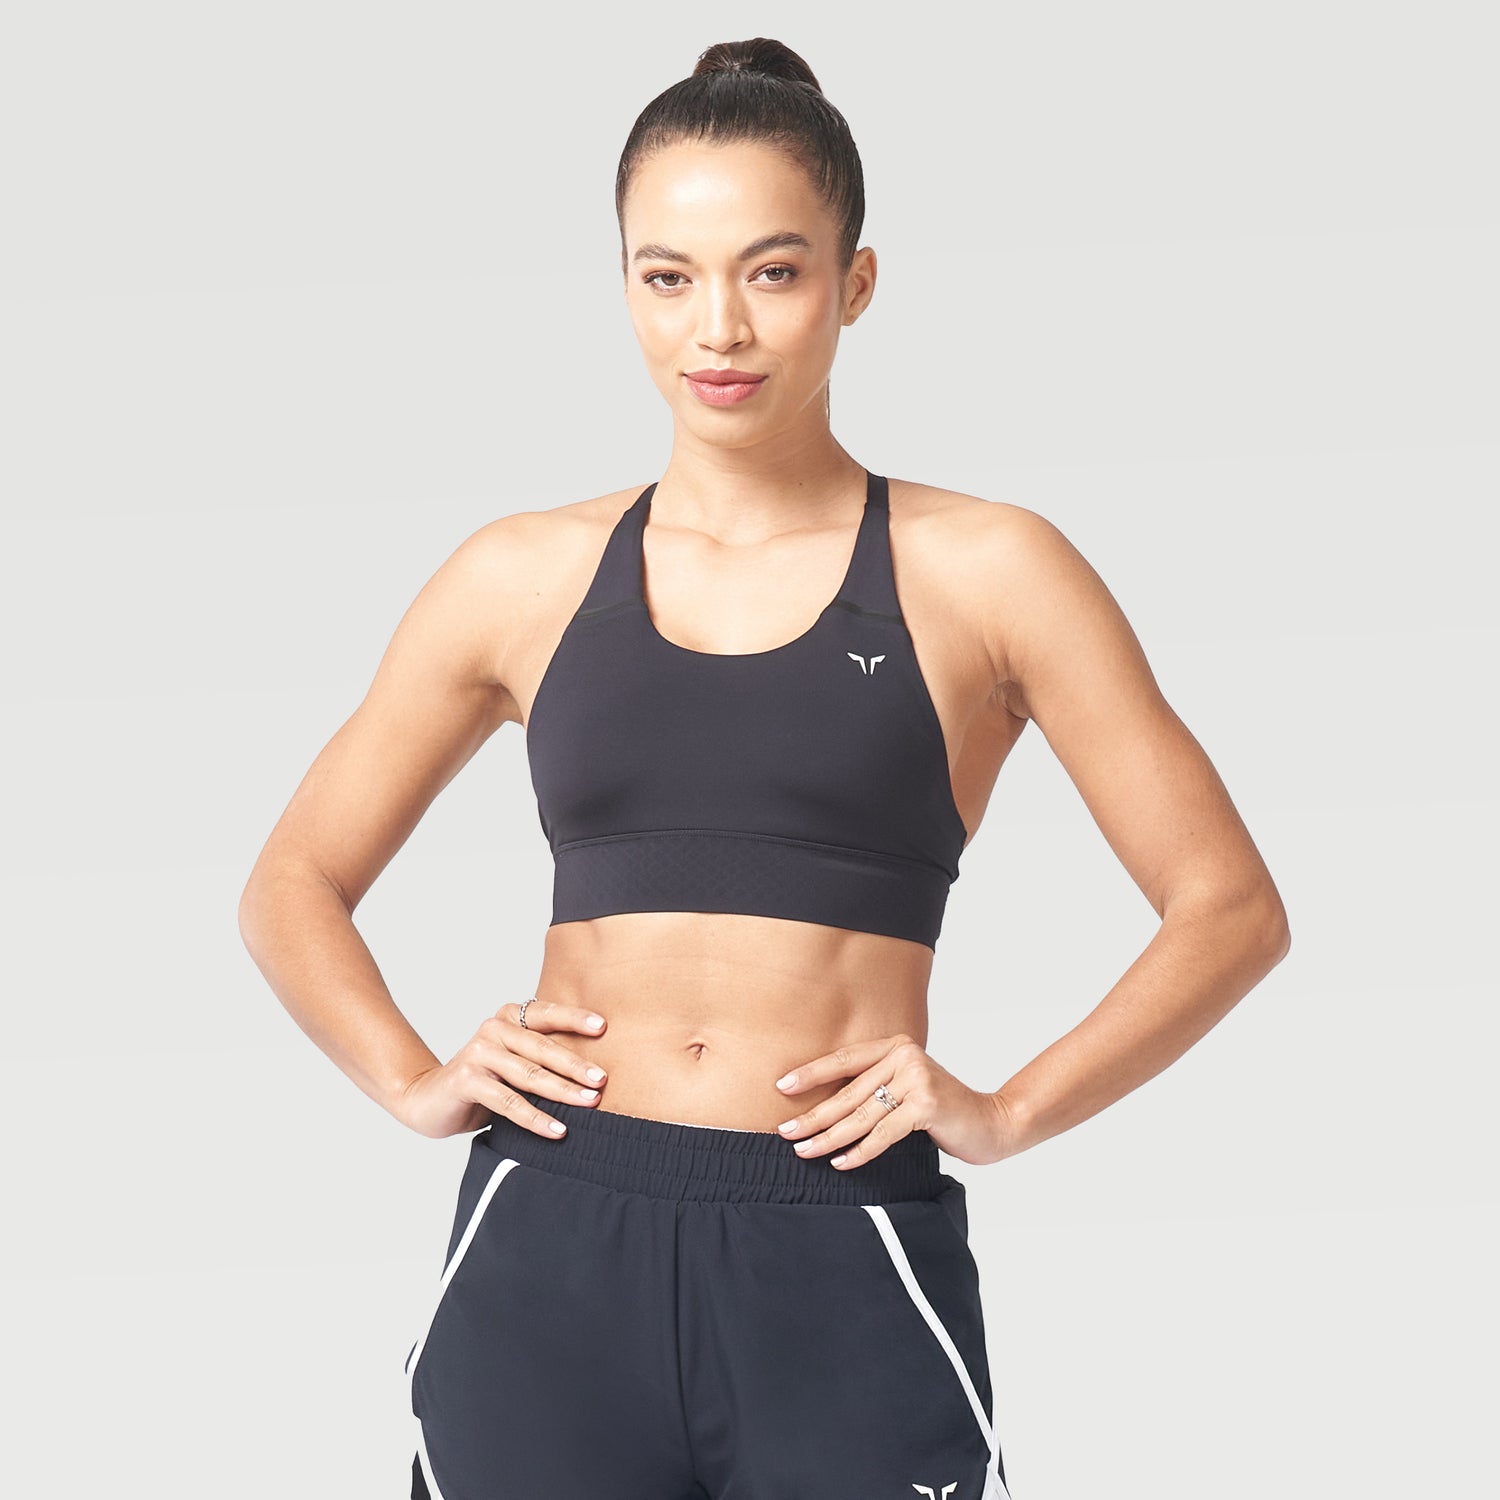 Old Navy Medium-Support PowerSoft Sports Bra 2-Pack for Women